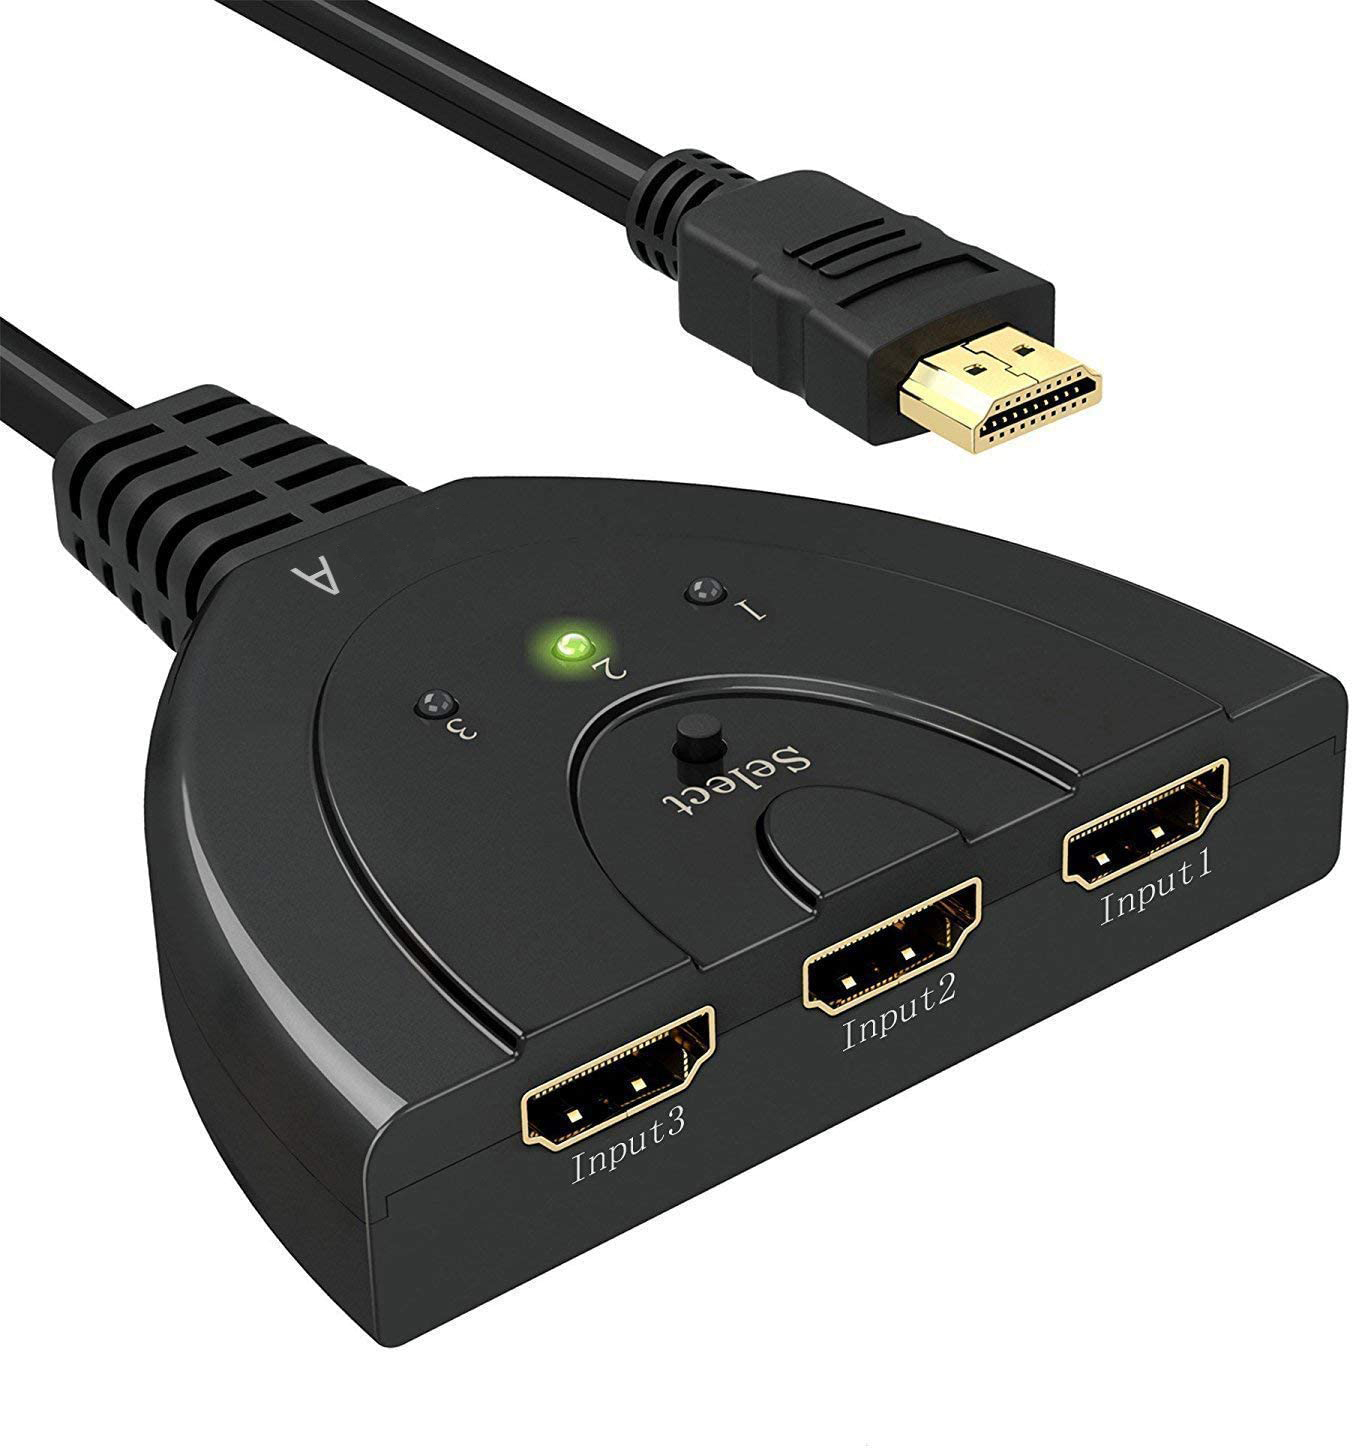 HSW0301D: 3 ports HDMI 1.3B Pigtail Auto Switch